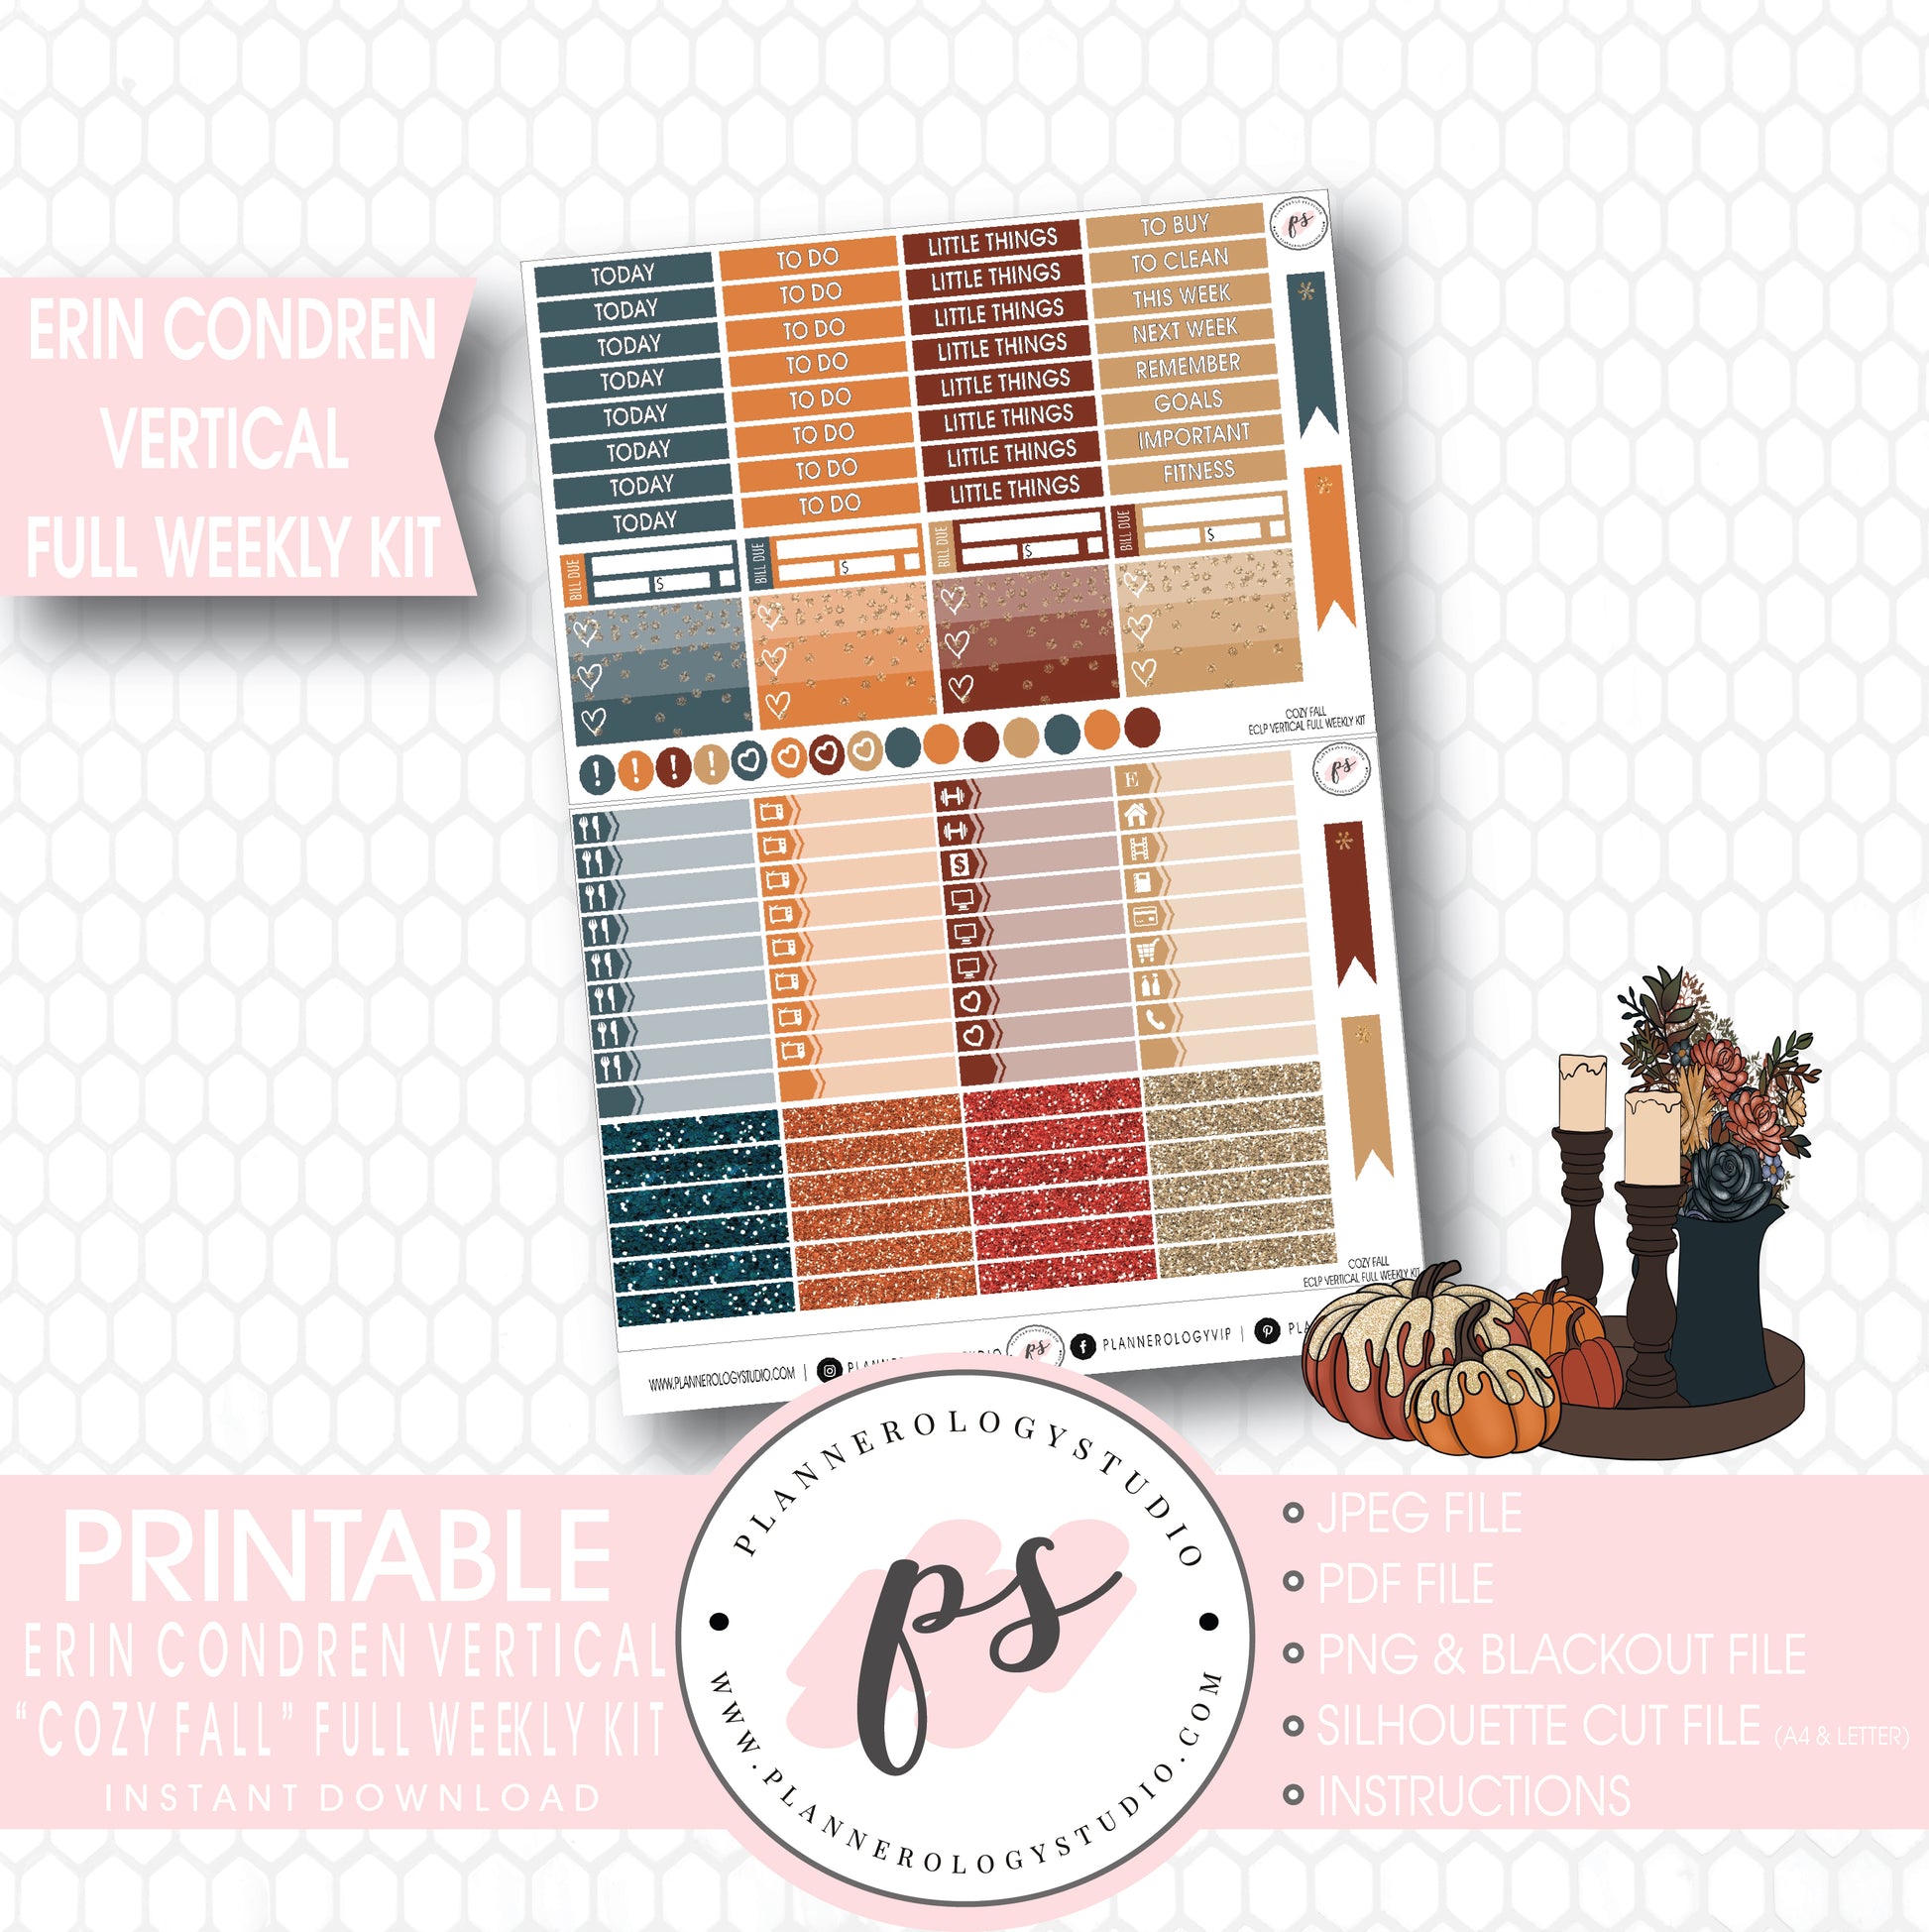 Cozy Fall Full Weekly Kit Printable Planner Stickers (for use with Erin Condren Vertical) - Plannerologystudio